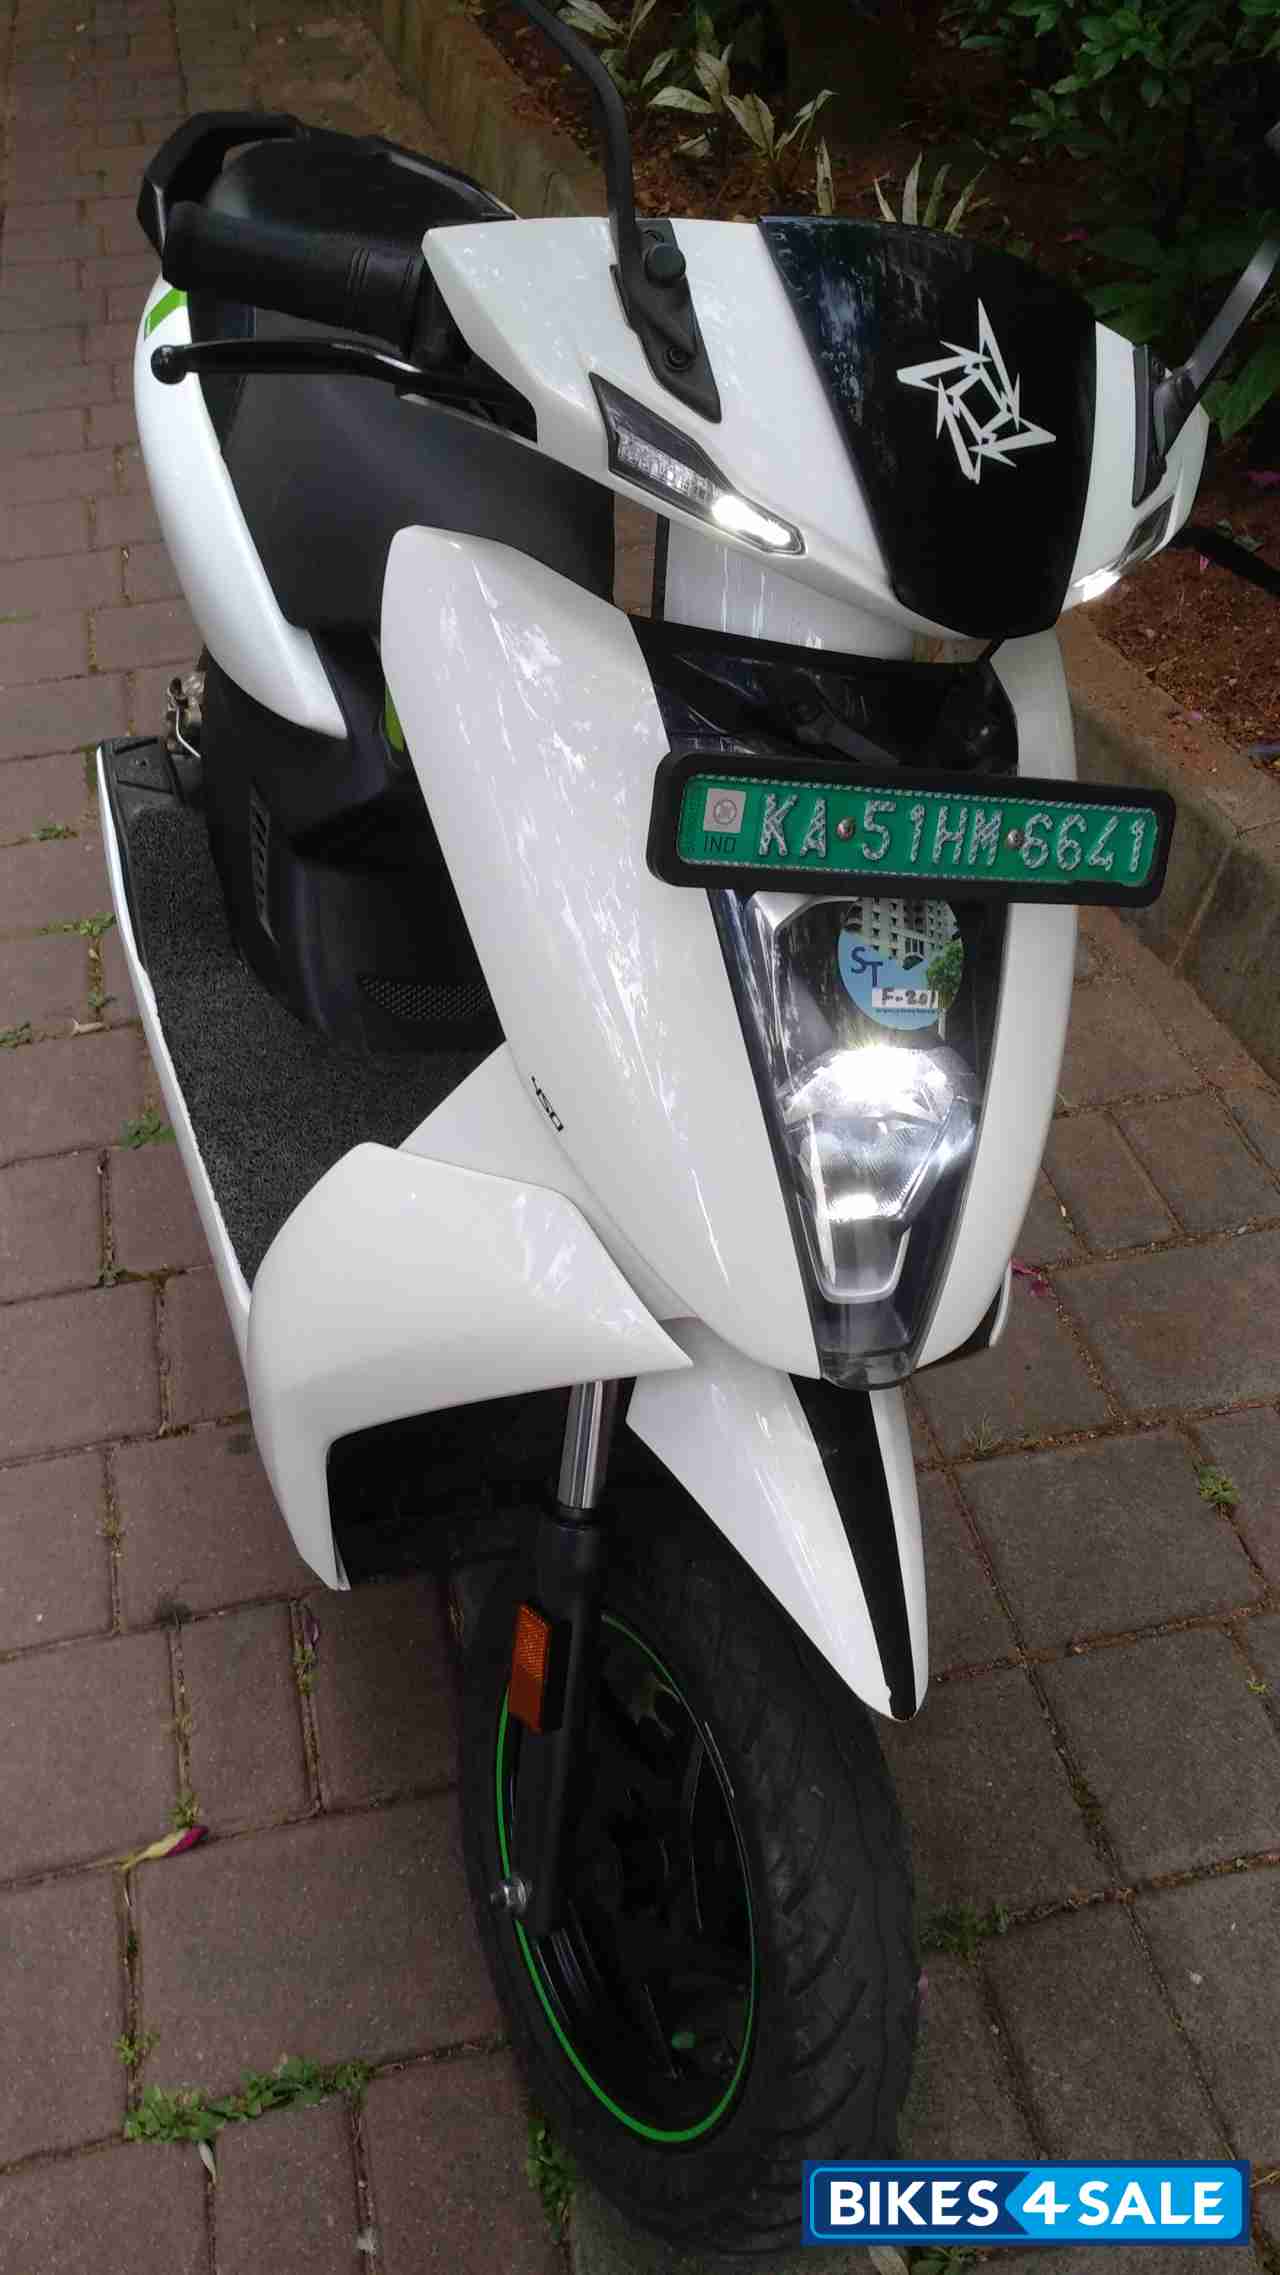 Ather 450